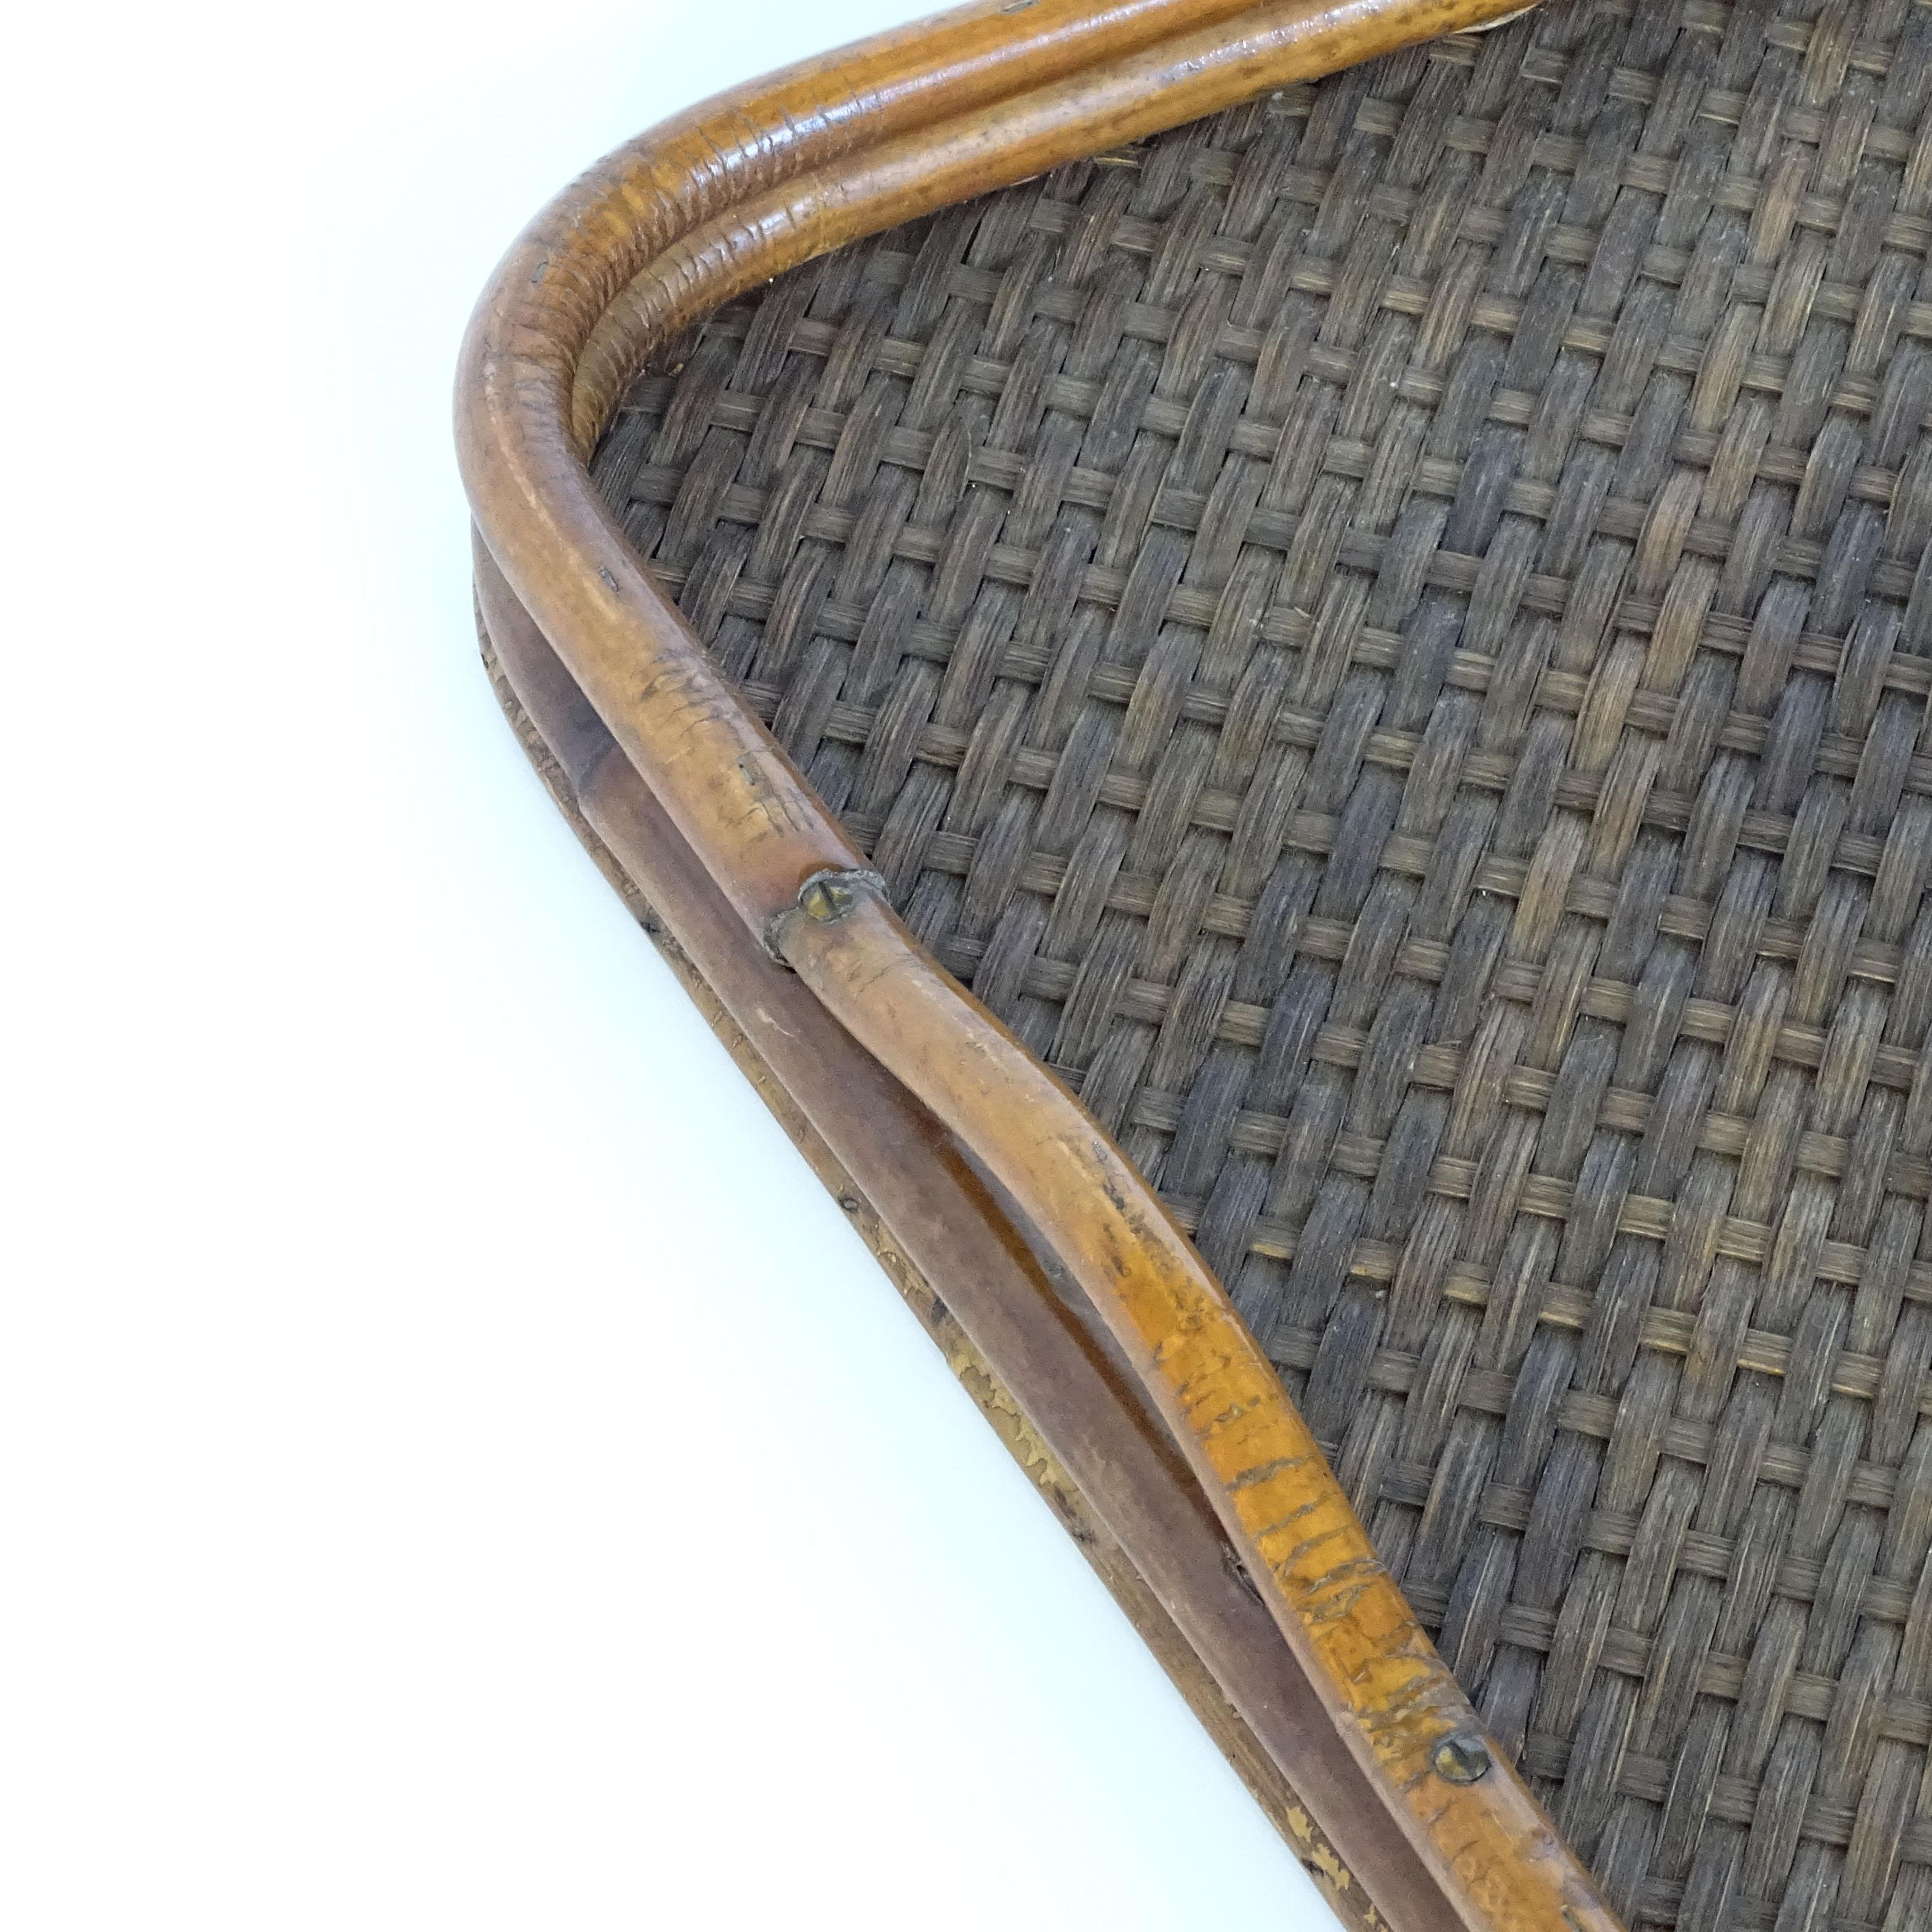 Italian Gabriella Crespi Bamboo and Rattan Large Serving Tray, Italy, 1970s